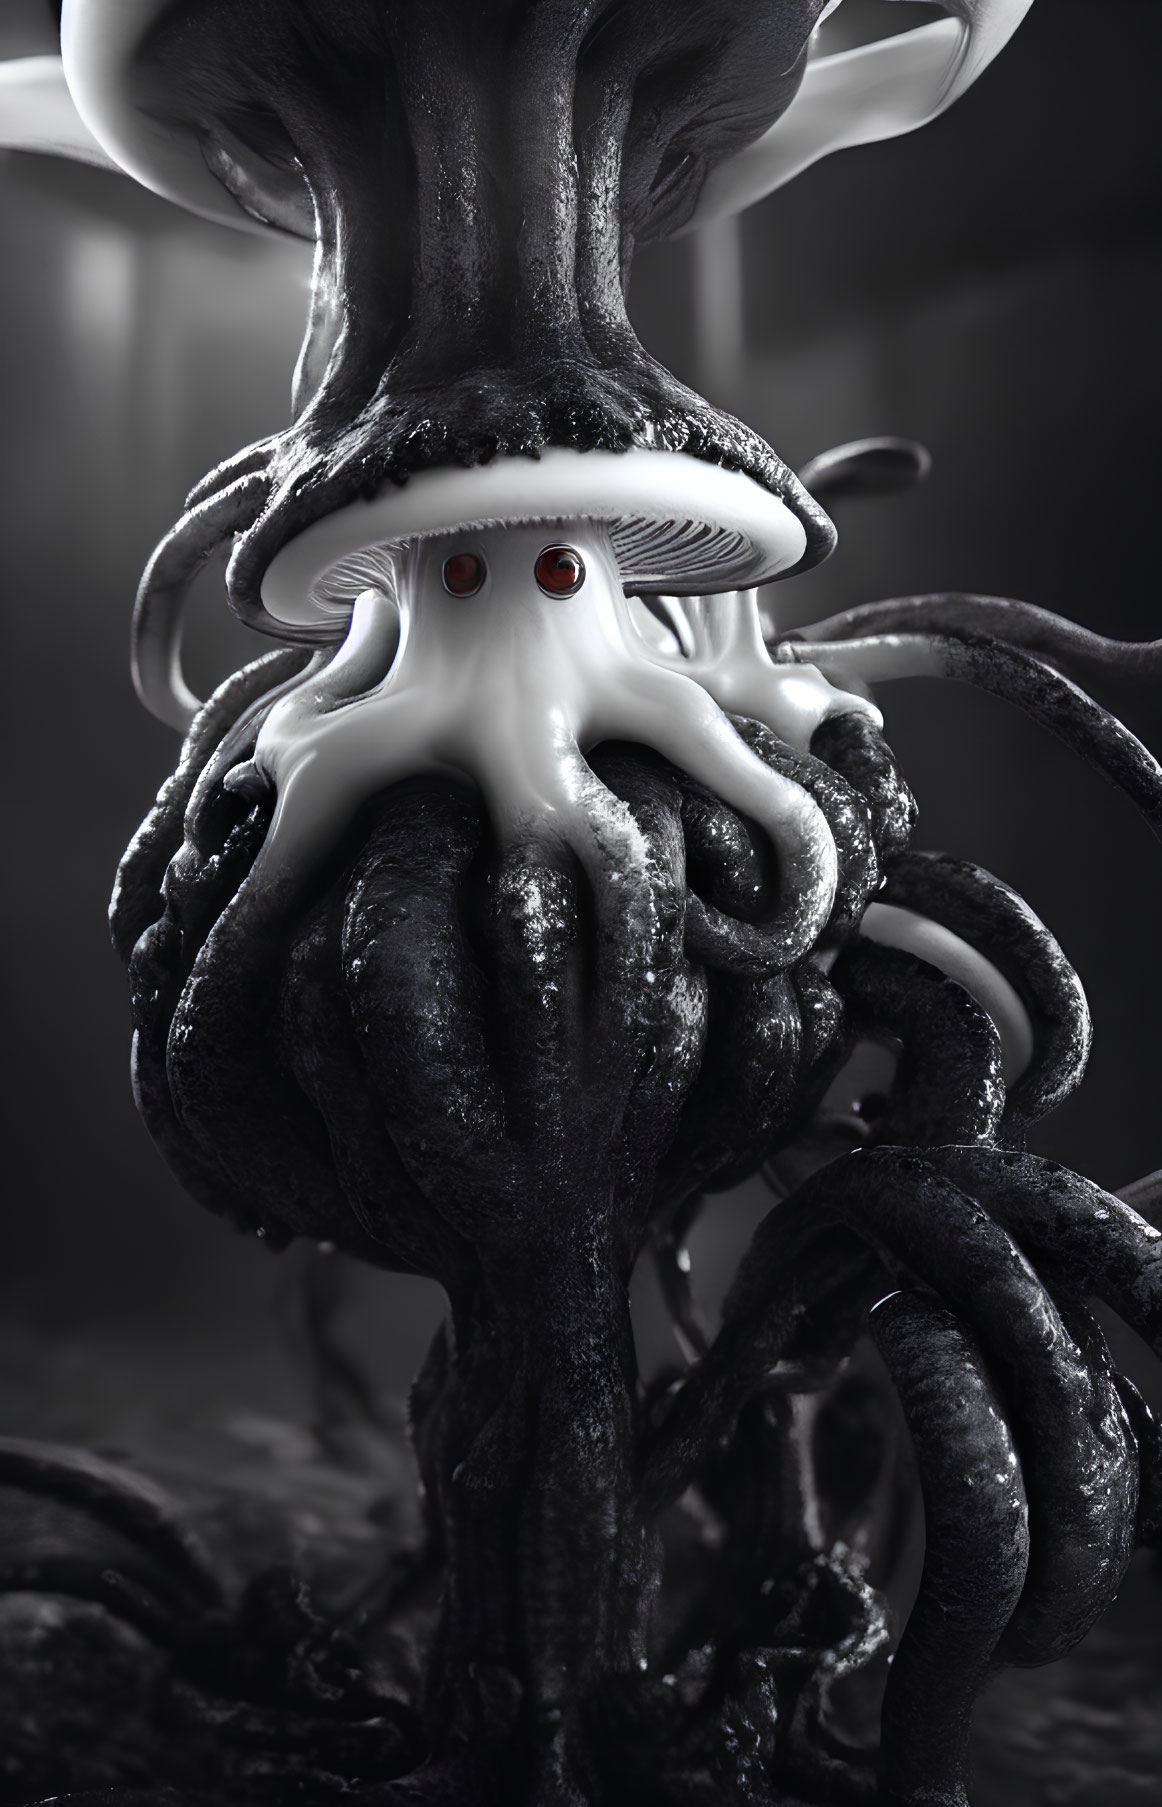 Octopus and Chess Pawn Hybrid Creature with Red Eyes on Dark Background